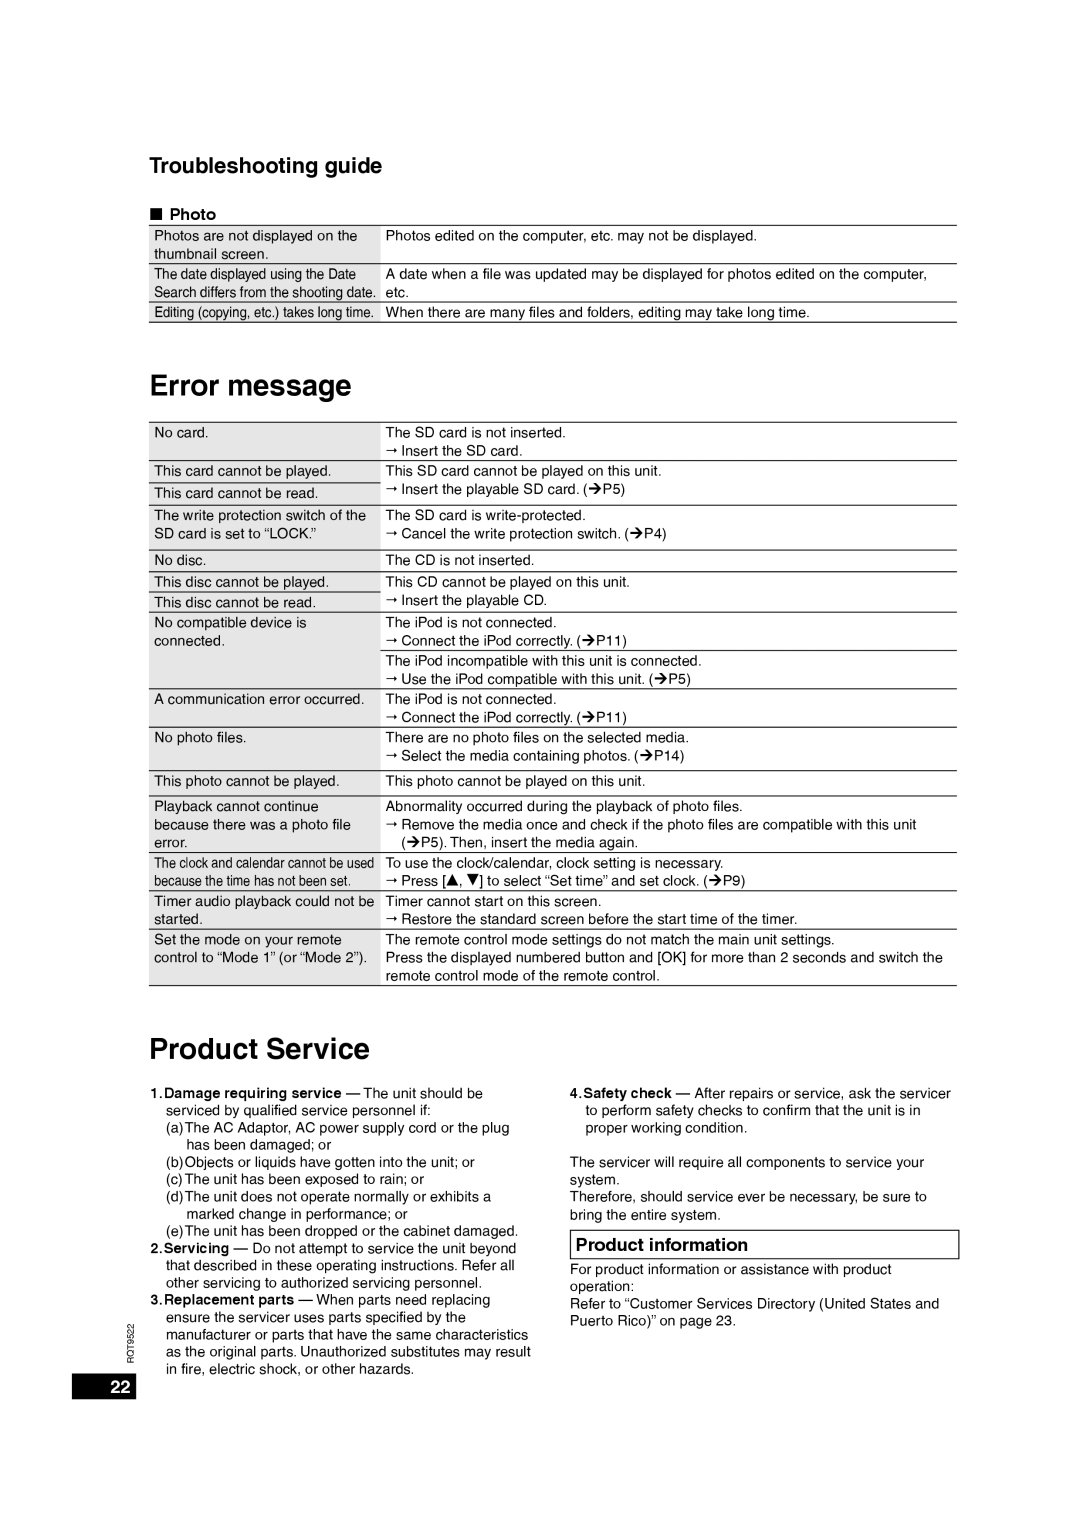 Panasonic MW-10 operating instructions Error message, Product Service, Troubleshooting guide, Product information, „ Photo 